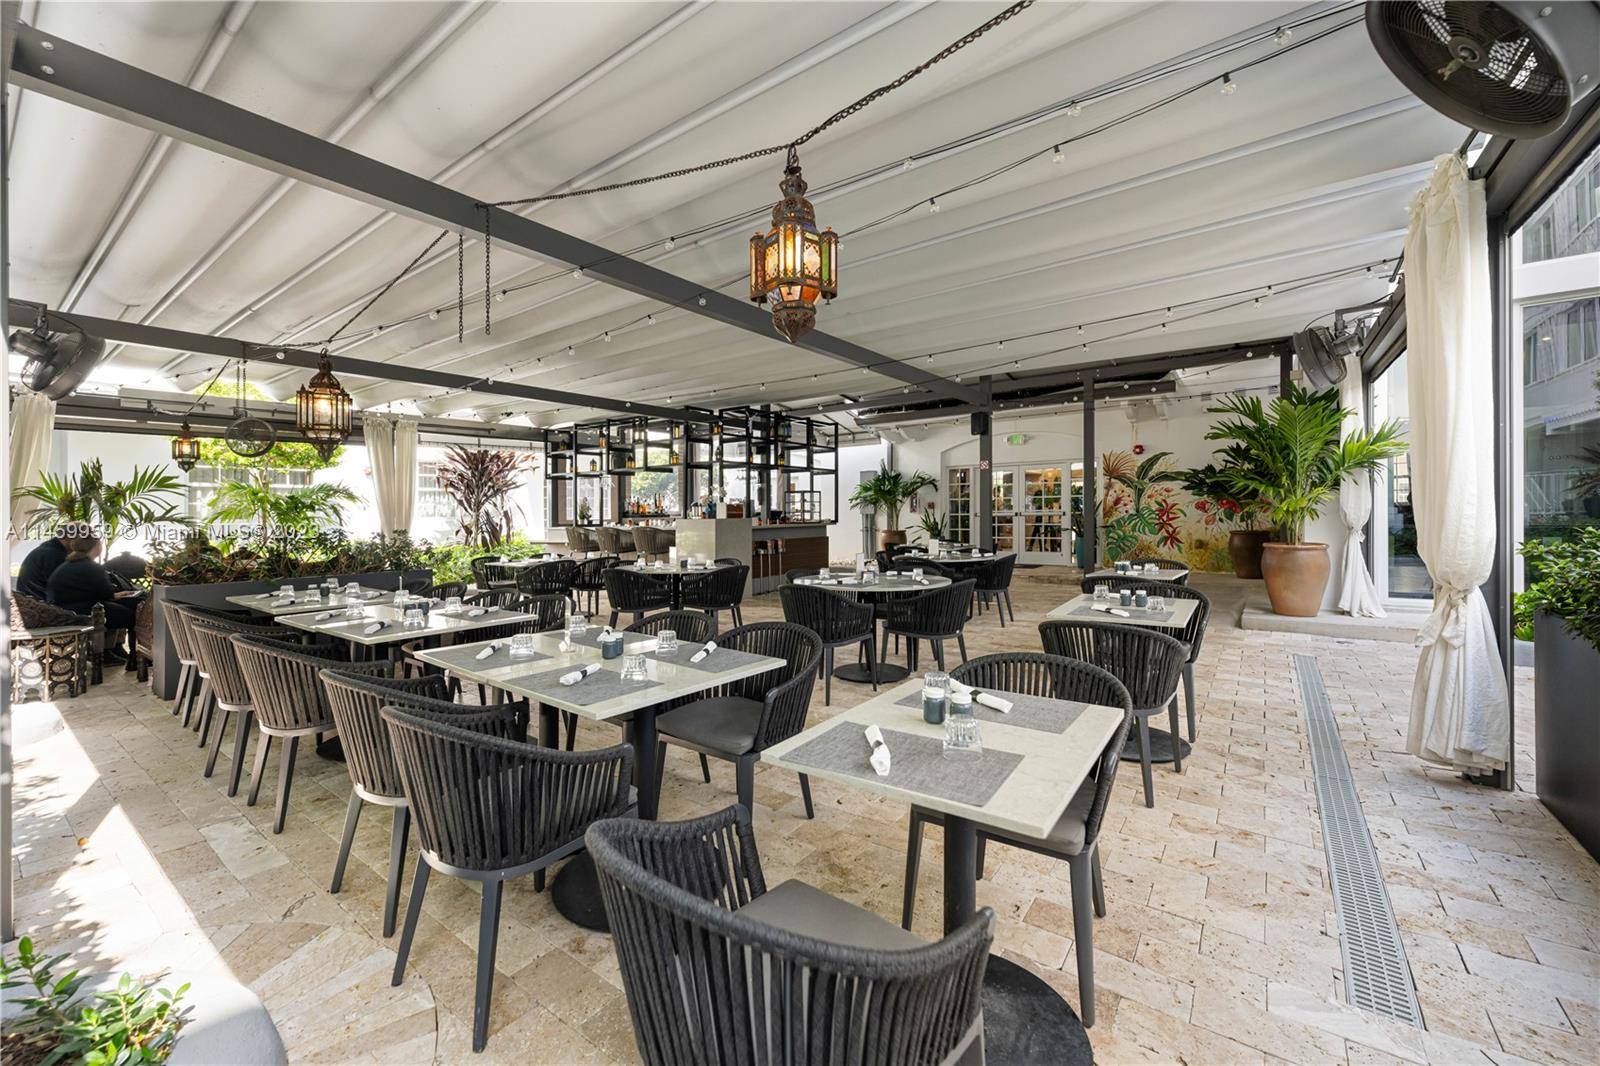 Prime Location ; This restaurant space is located in the highly desirable area of Miami Beach at The Berkeley Park Hotel, making it an ideal spot for attracting both locals ...